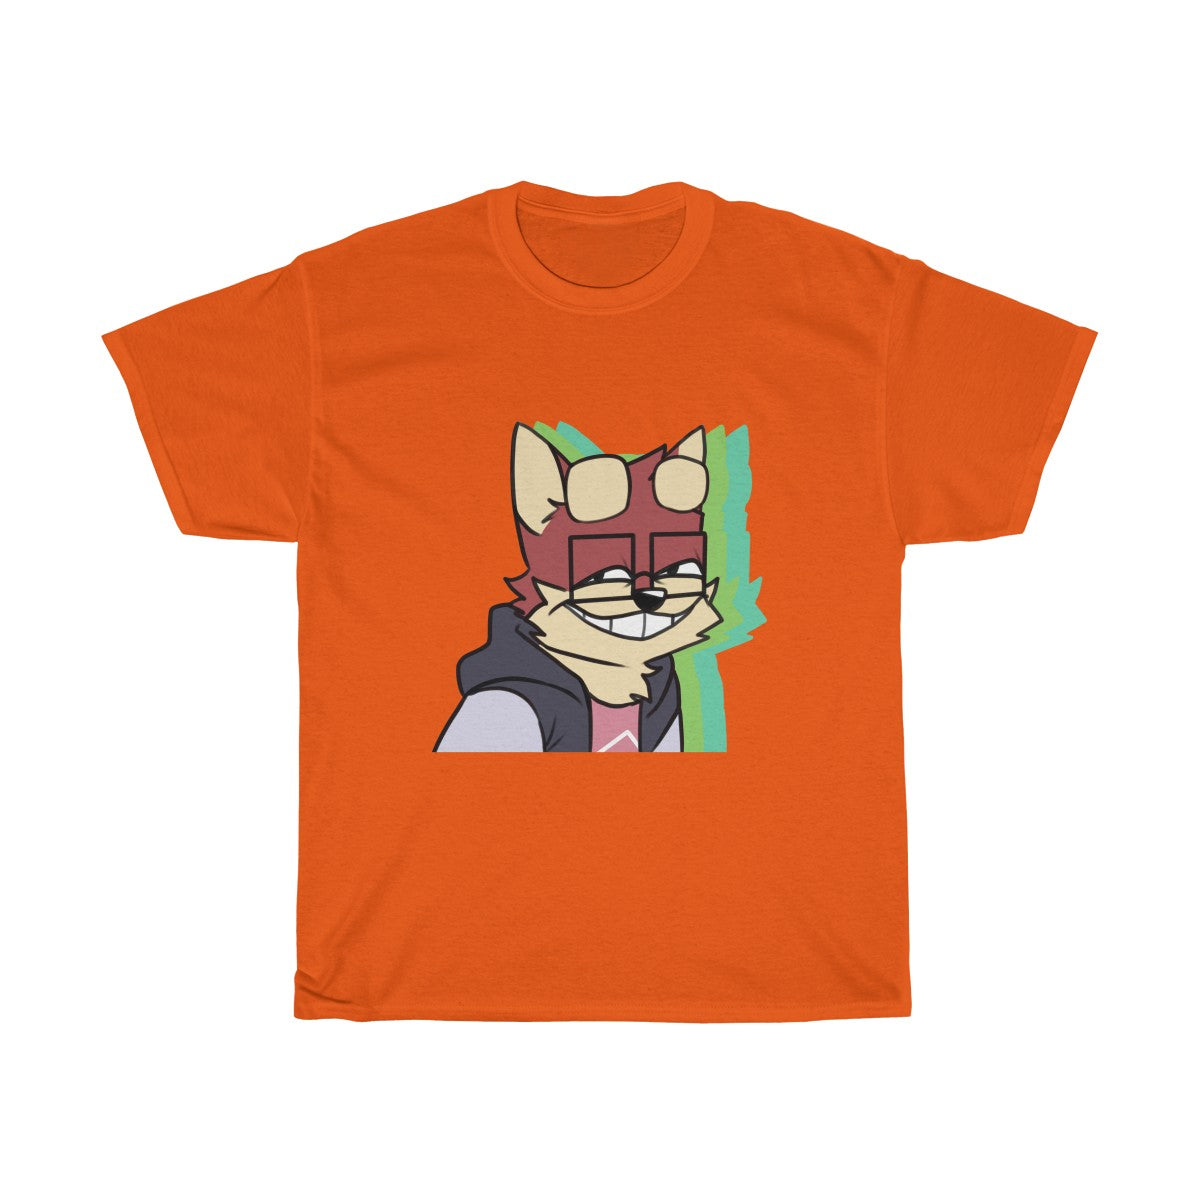 Thinking About You - T-Shirt T-Shirt Ooka Orange S 